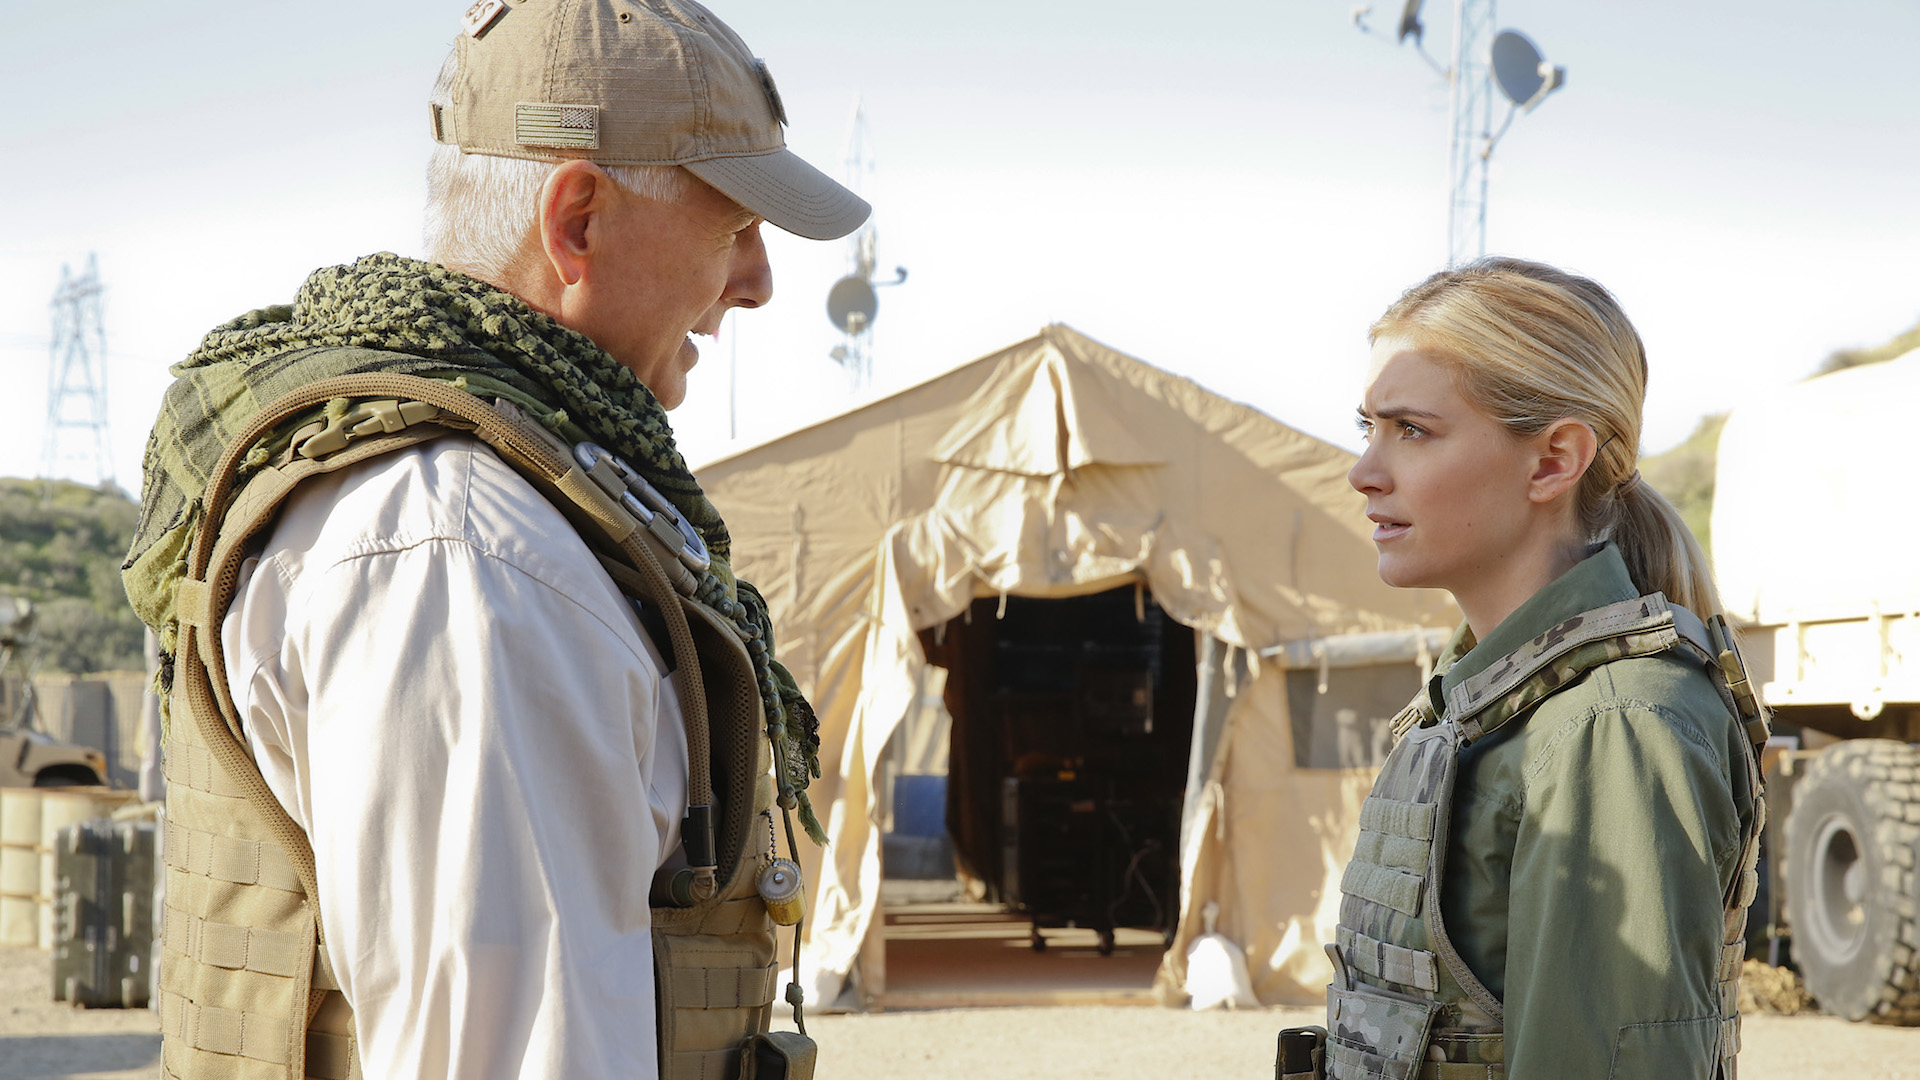 NCIS: Gibbs saves Bishop while on a rescue mission in Afghanistan.